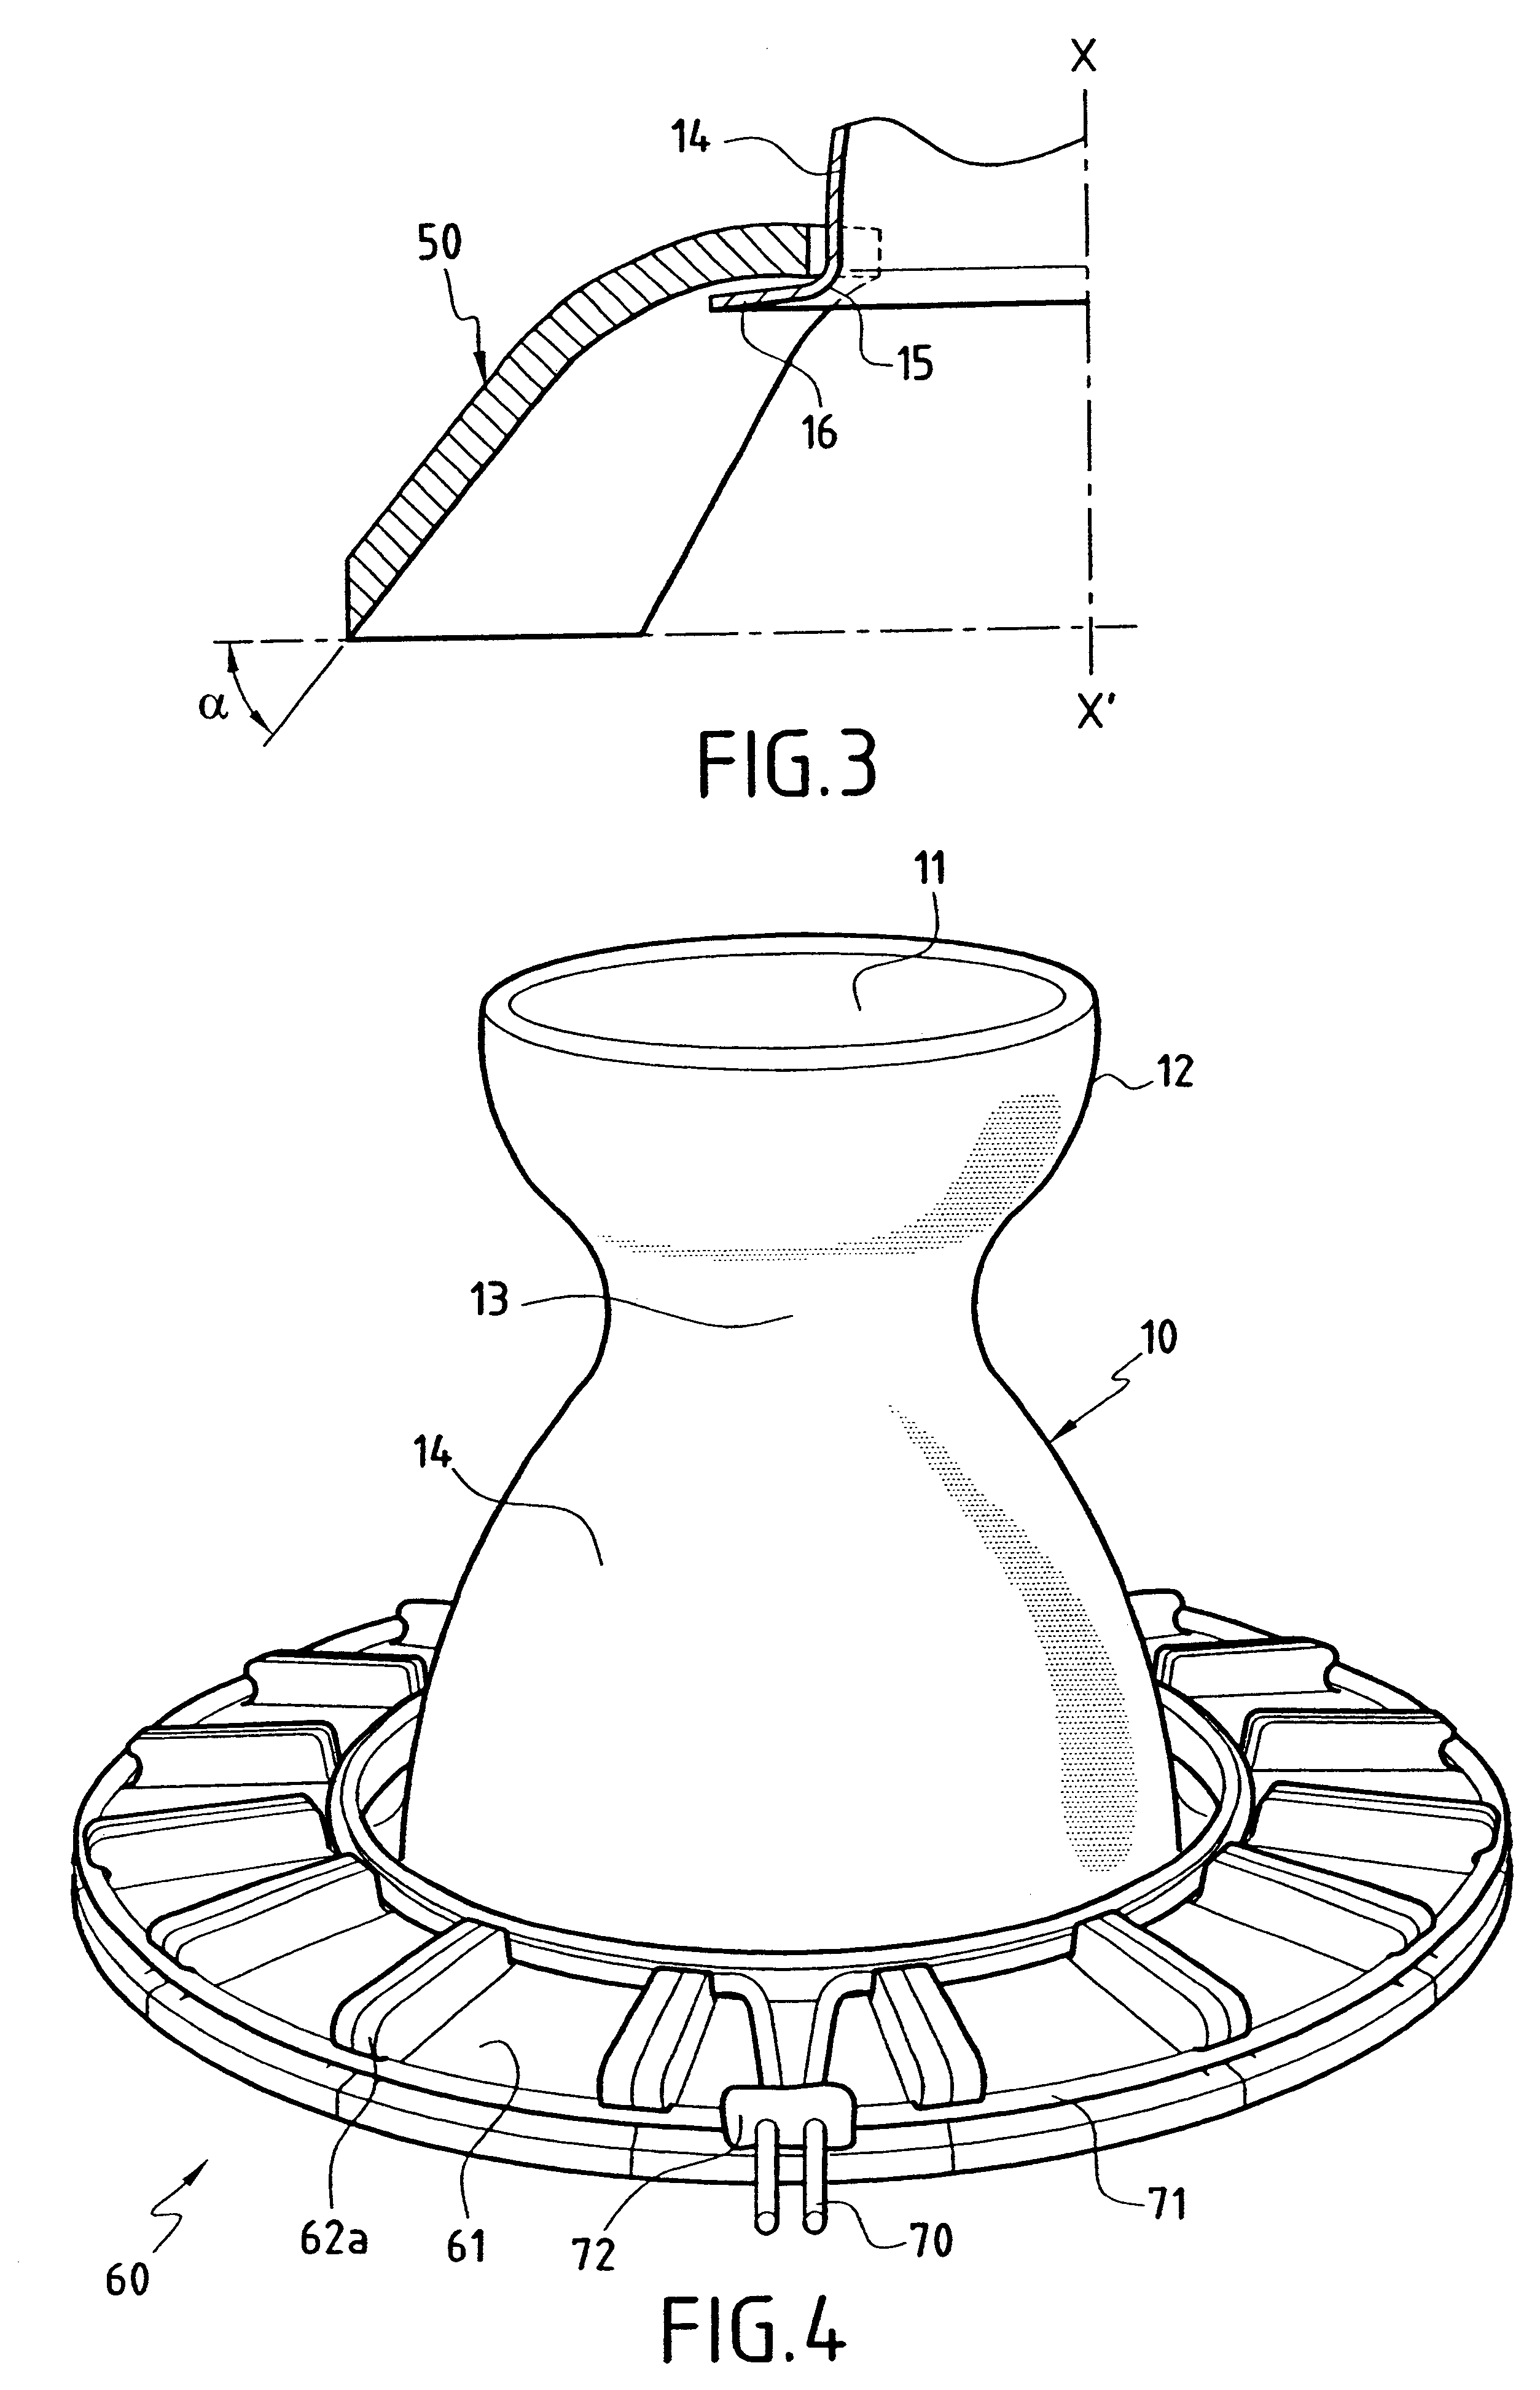 Device for displacing to nozzle outlet or eliminating jet separation in rocket engine nozzles, and a nozzle including the device